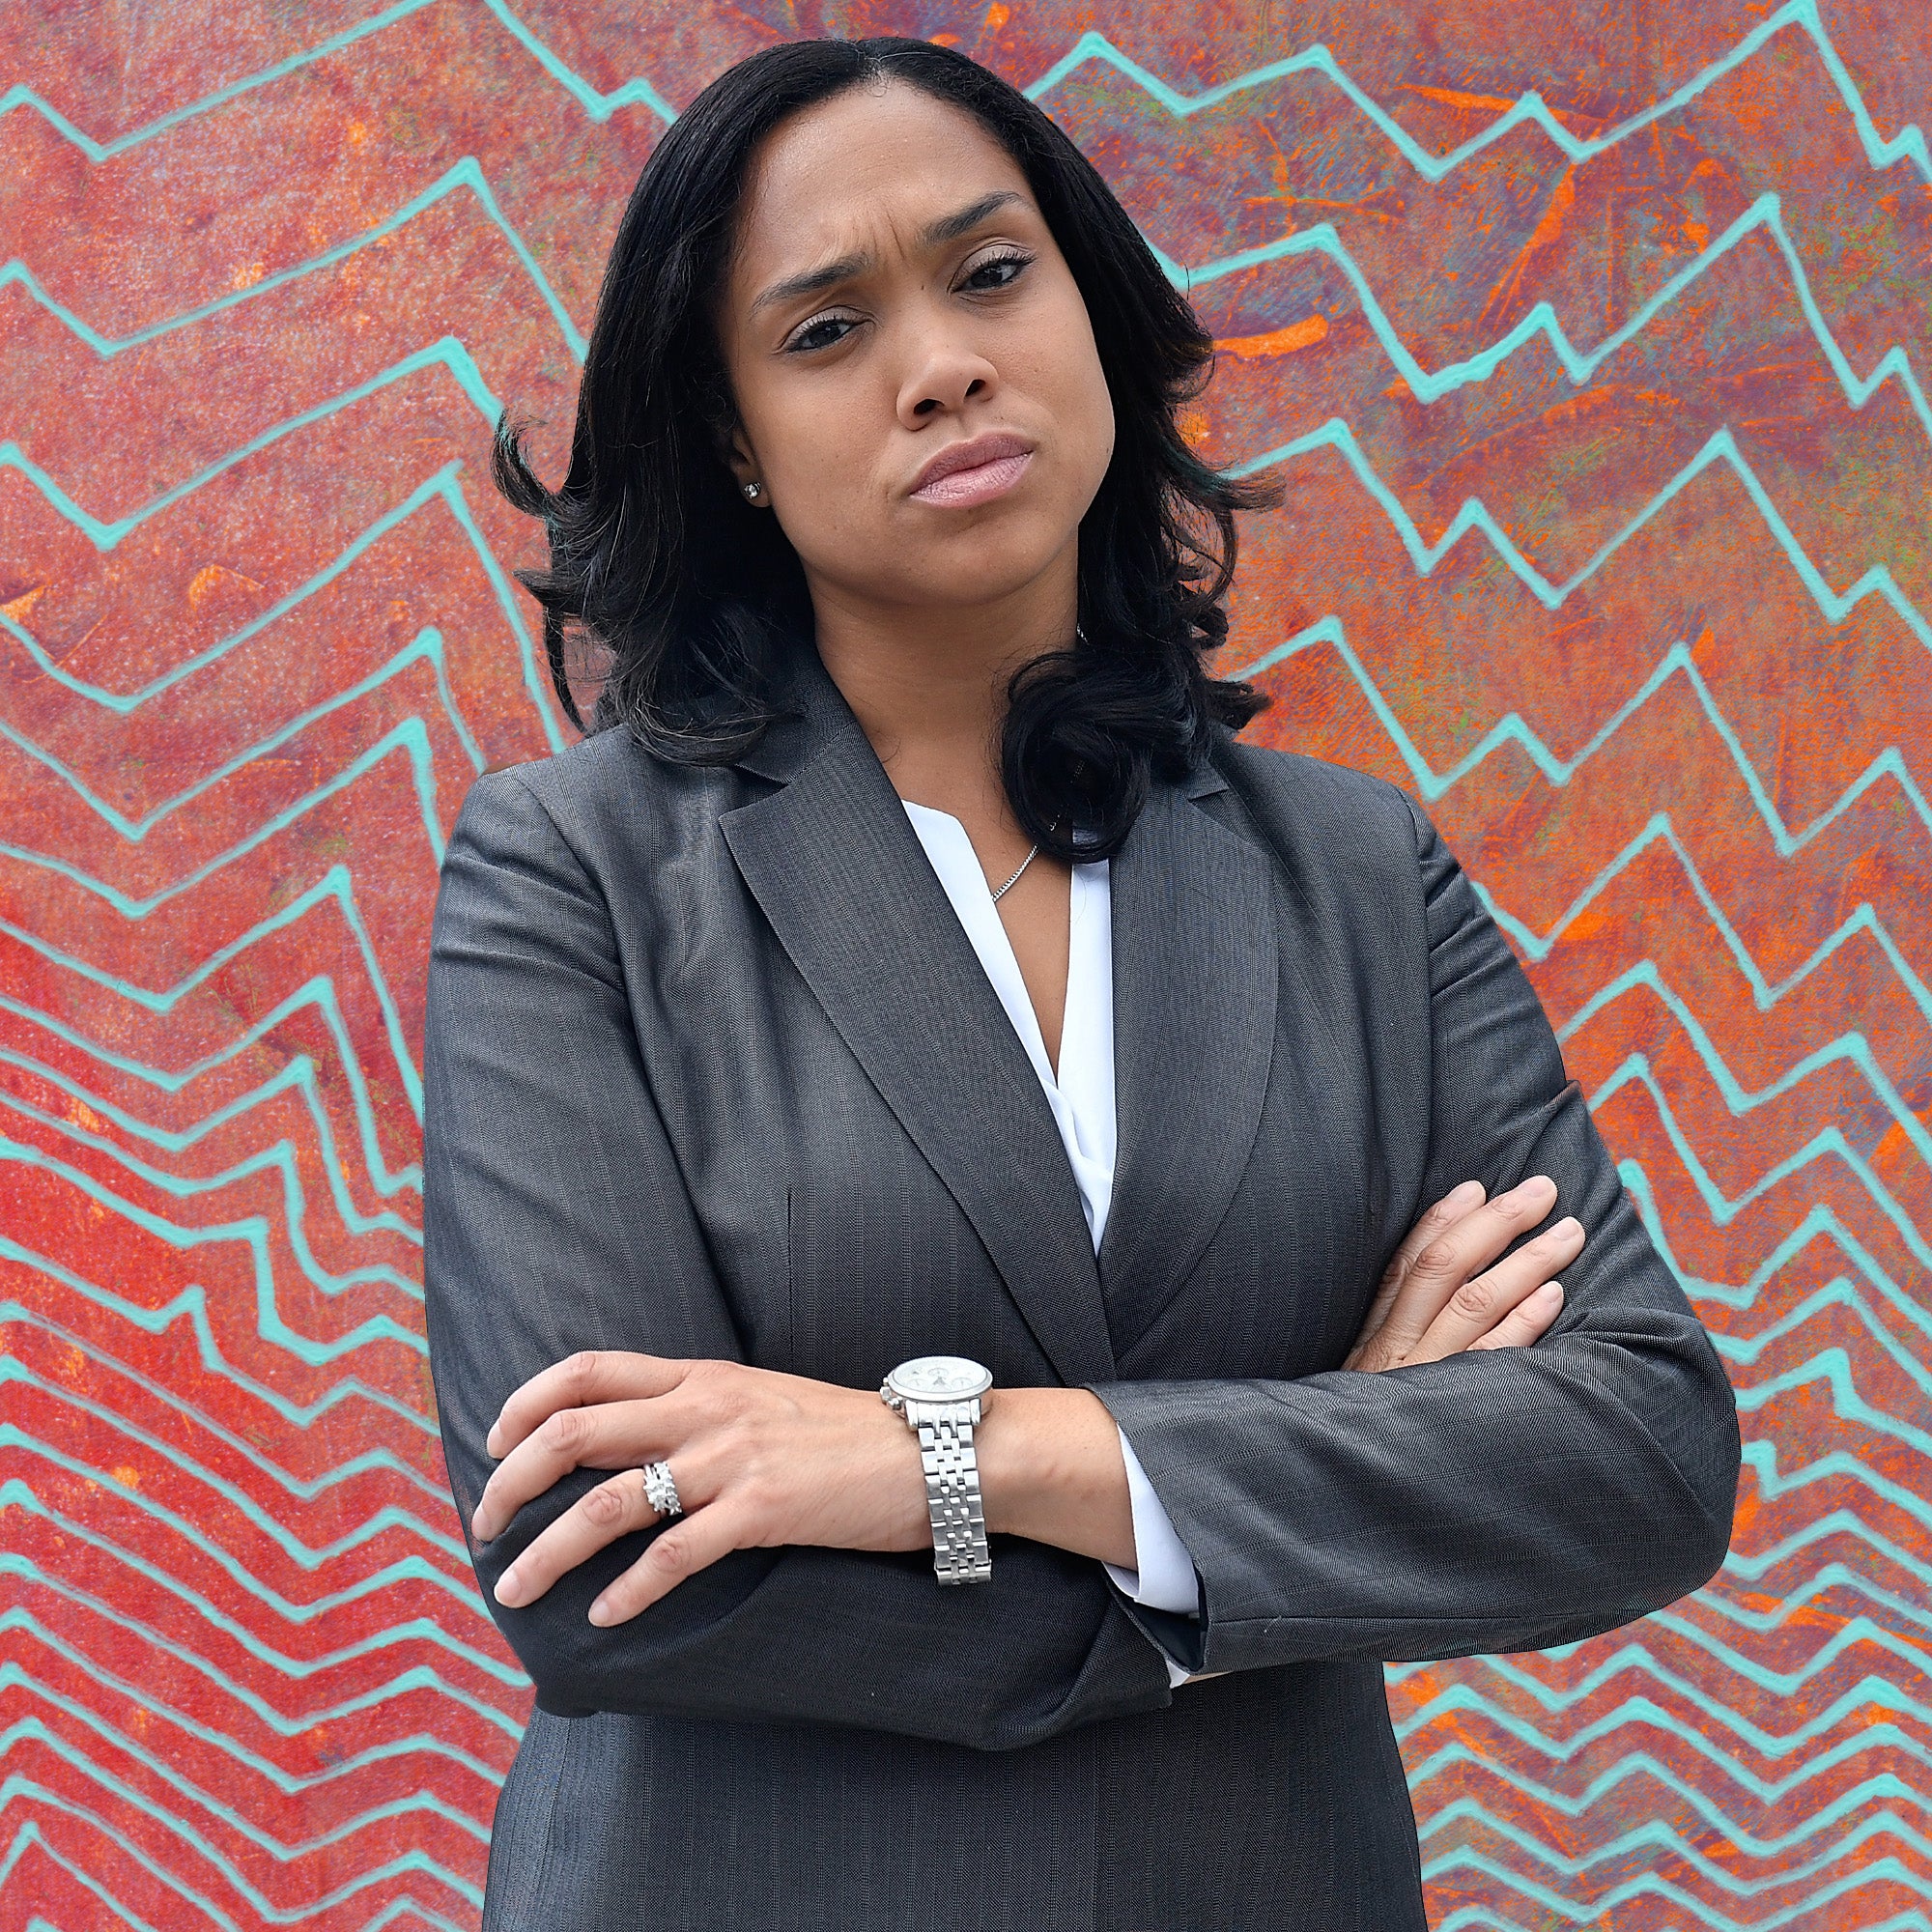 Marilyn Mosby Wins Re-election For Baltimore State's Attorney